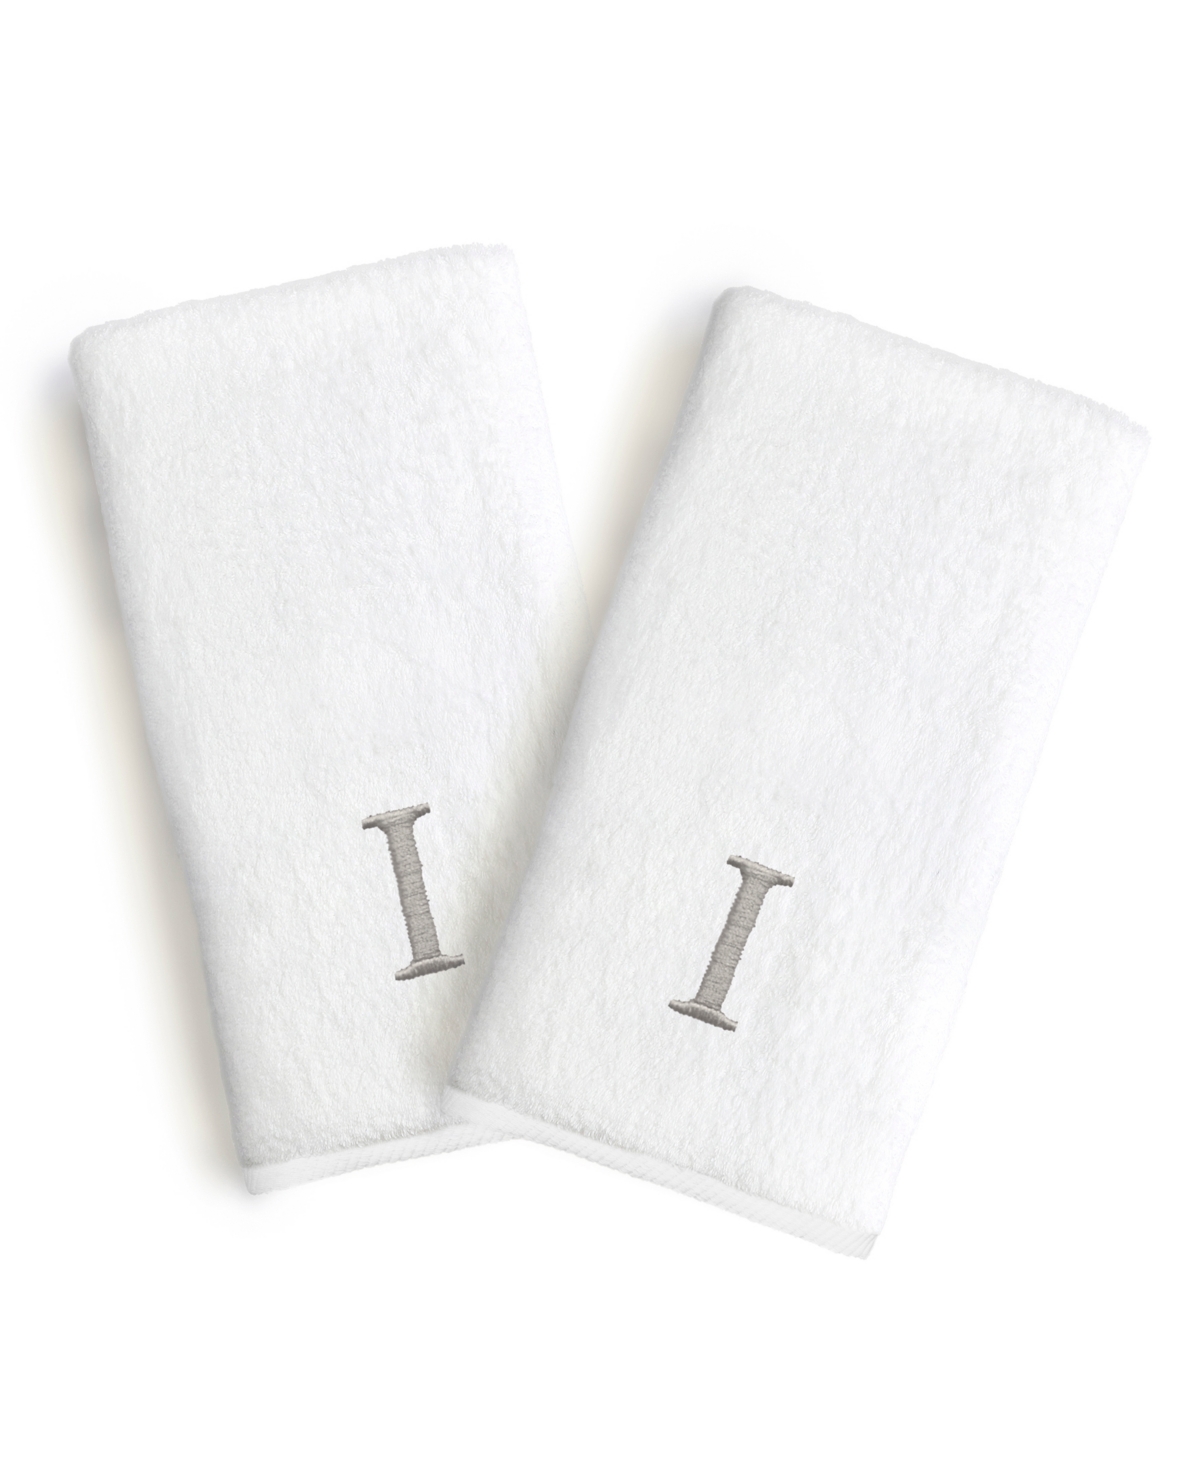 Linum Home Bookman Gray Font Monogrammed Luxury 100% Turkish Cotton Novelty 2-piece Hand Towels, 16" X 30" Bedd In Gray - I